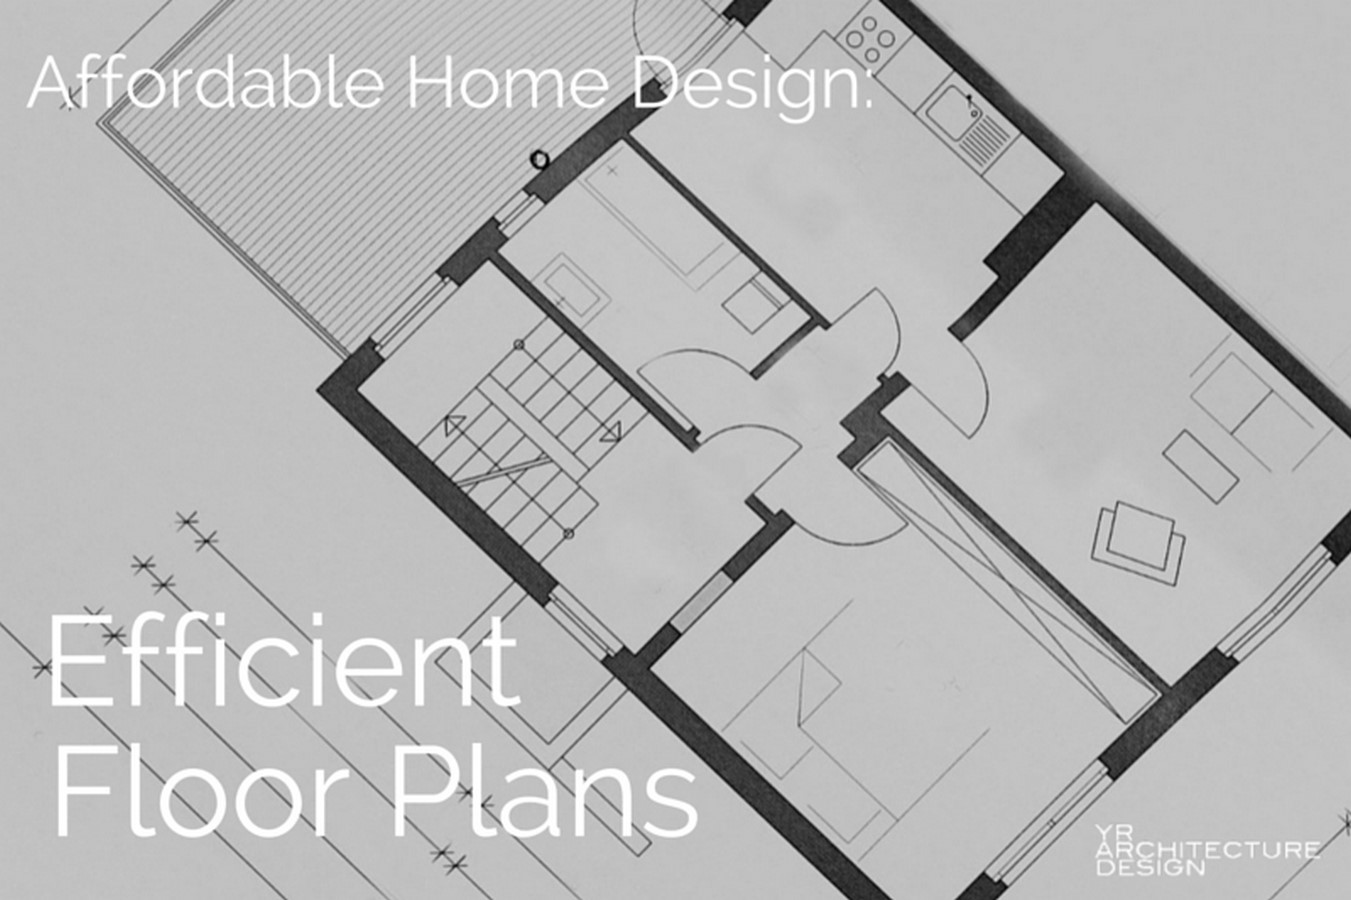 10 things to remember while designing low cost residences - Sheet2